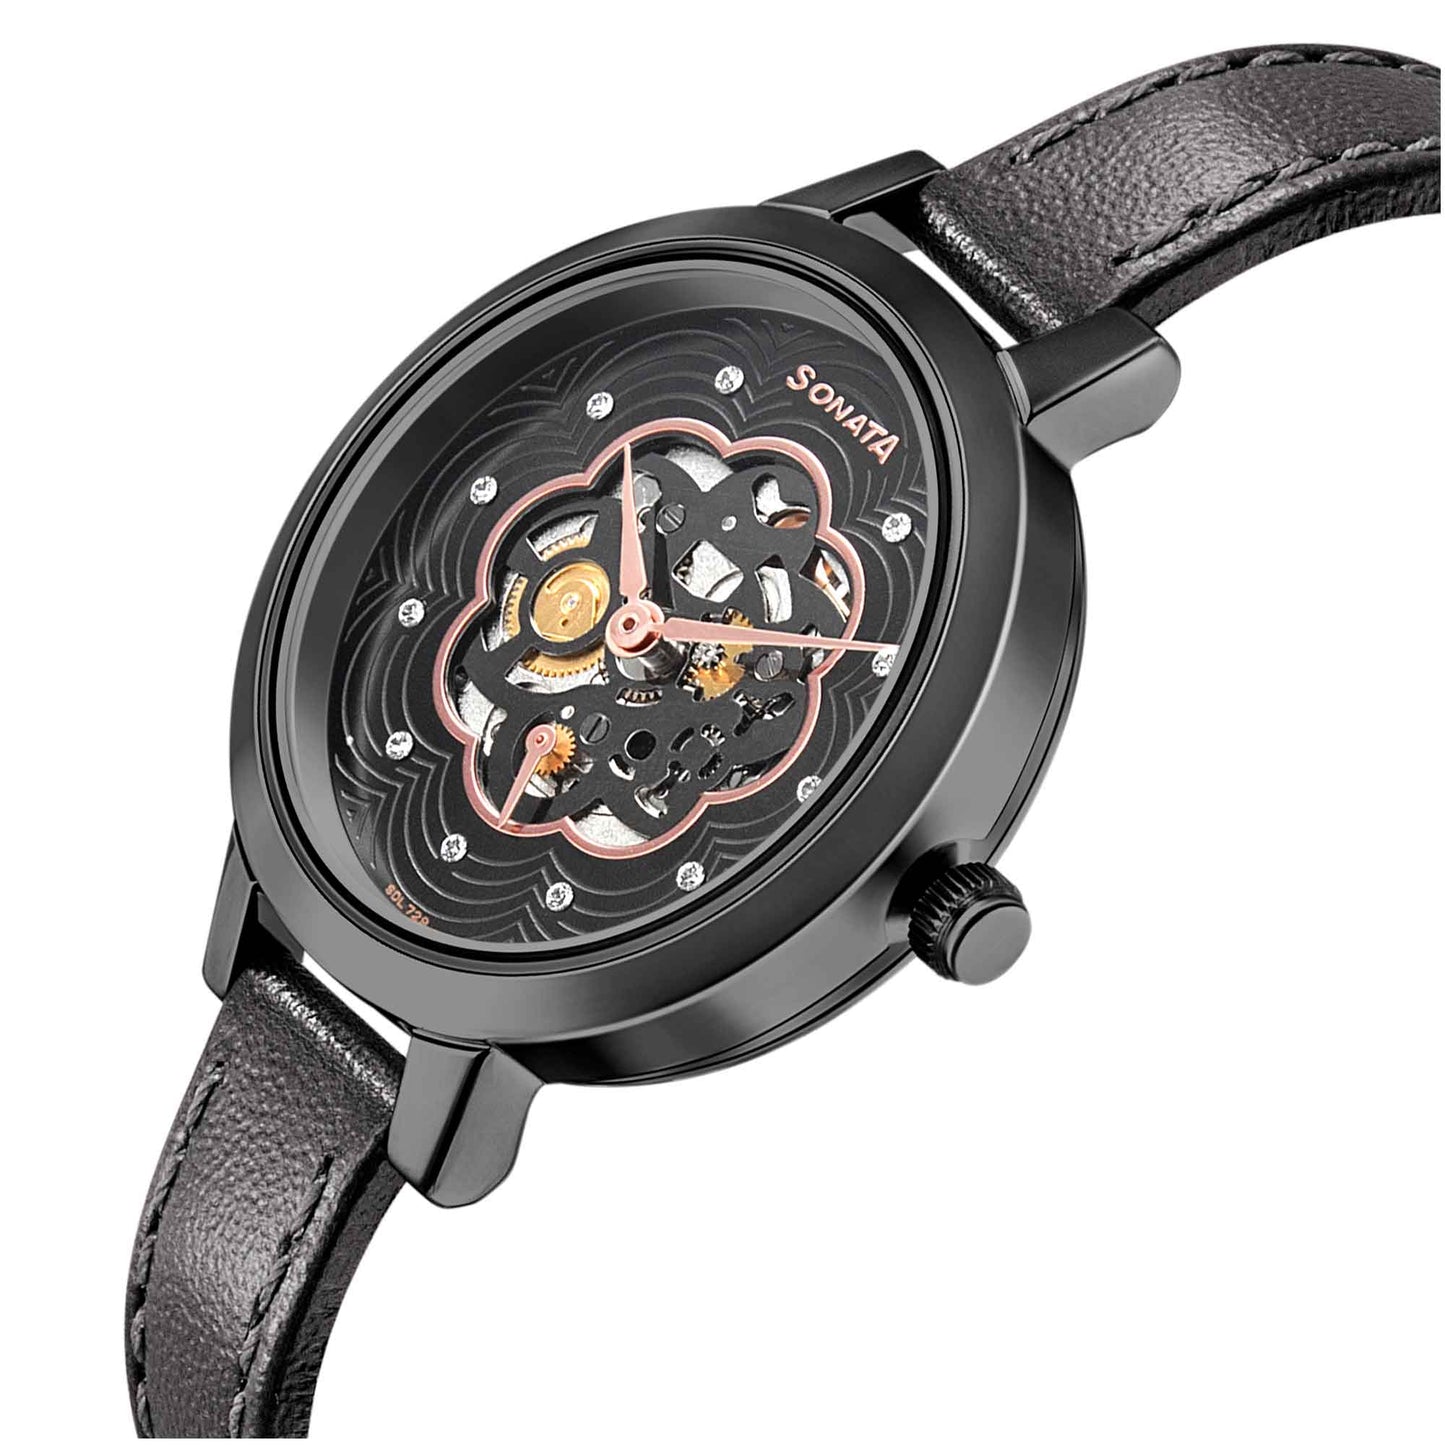 Sonata Unveil Black Dial Women Watch With Leather Strap